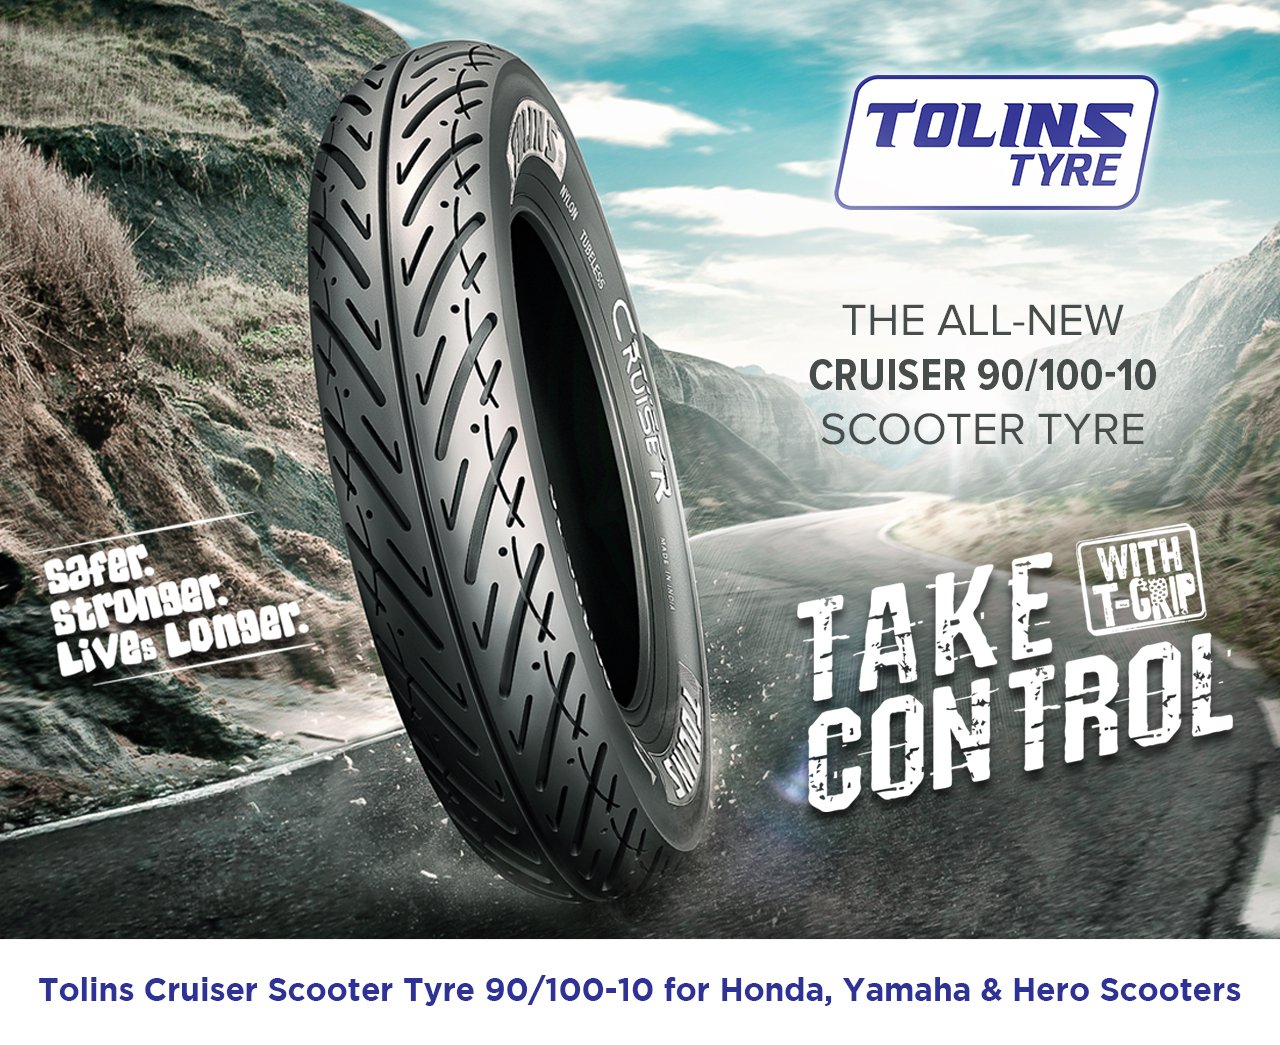 All-New Tolins Cruiser 90/100 - 10 Scooter Tyre